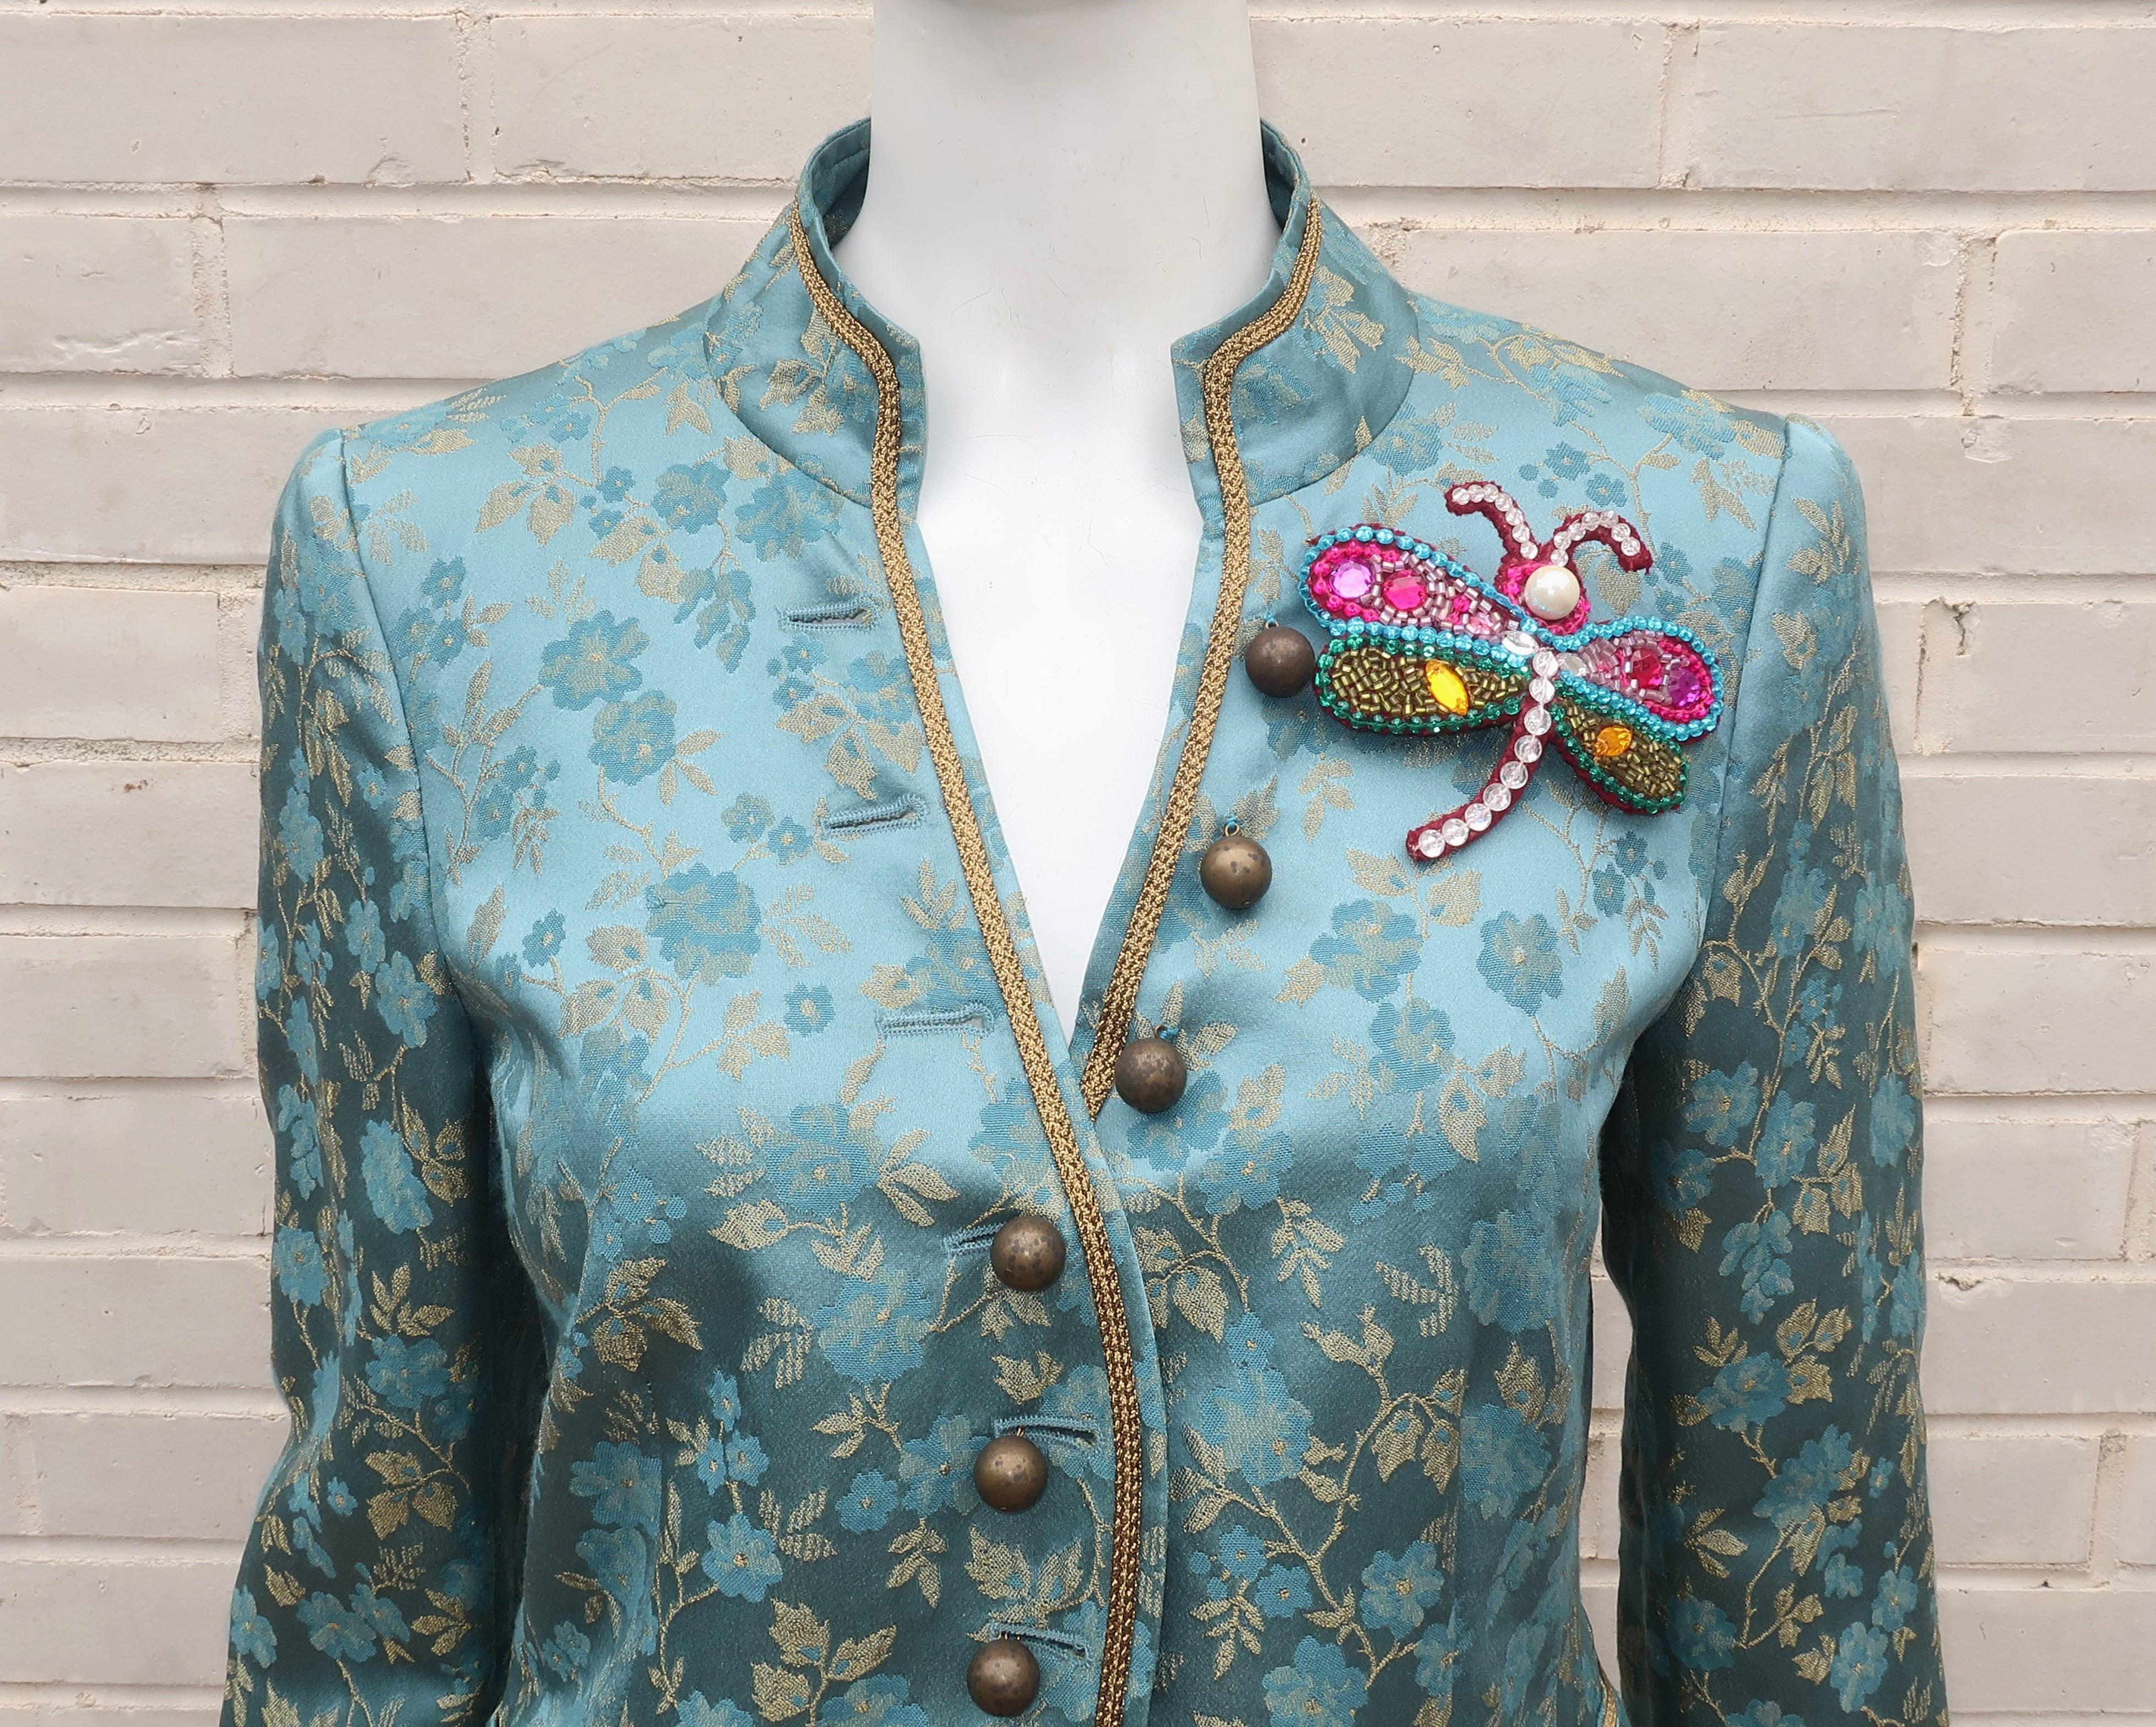 A whimsical ‘I Love Bollywood’ light teal green and gold brocade jacket from Moschino's Cheap And Chic label trimmed in an antique gold braid and accented by a brightly colored jeweled dragonfly introducing shades of fuchsia, red, gold, green, aqua